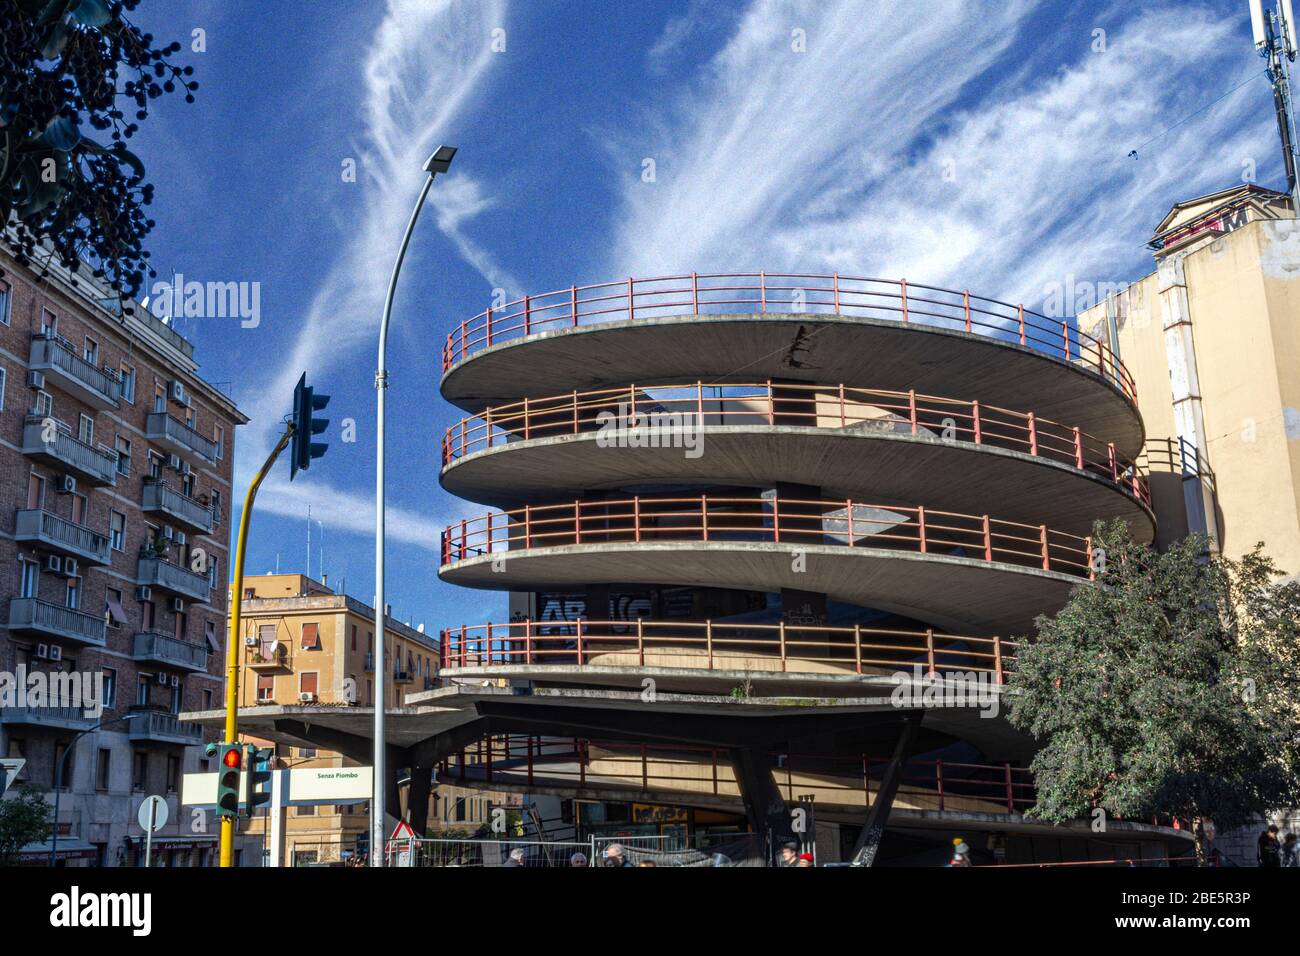 Rome, Italy, 25.12.2019: multi-level car parking in the city centre, parking in the center of Rome, blue cloudy sky Stock Photo